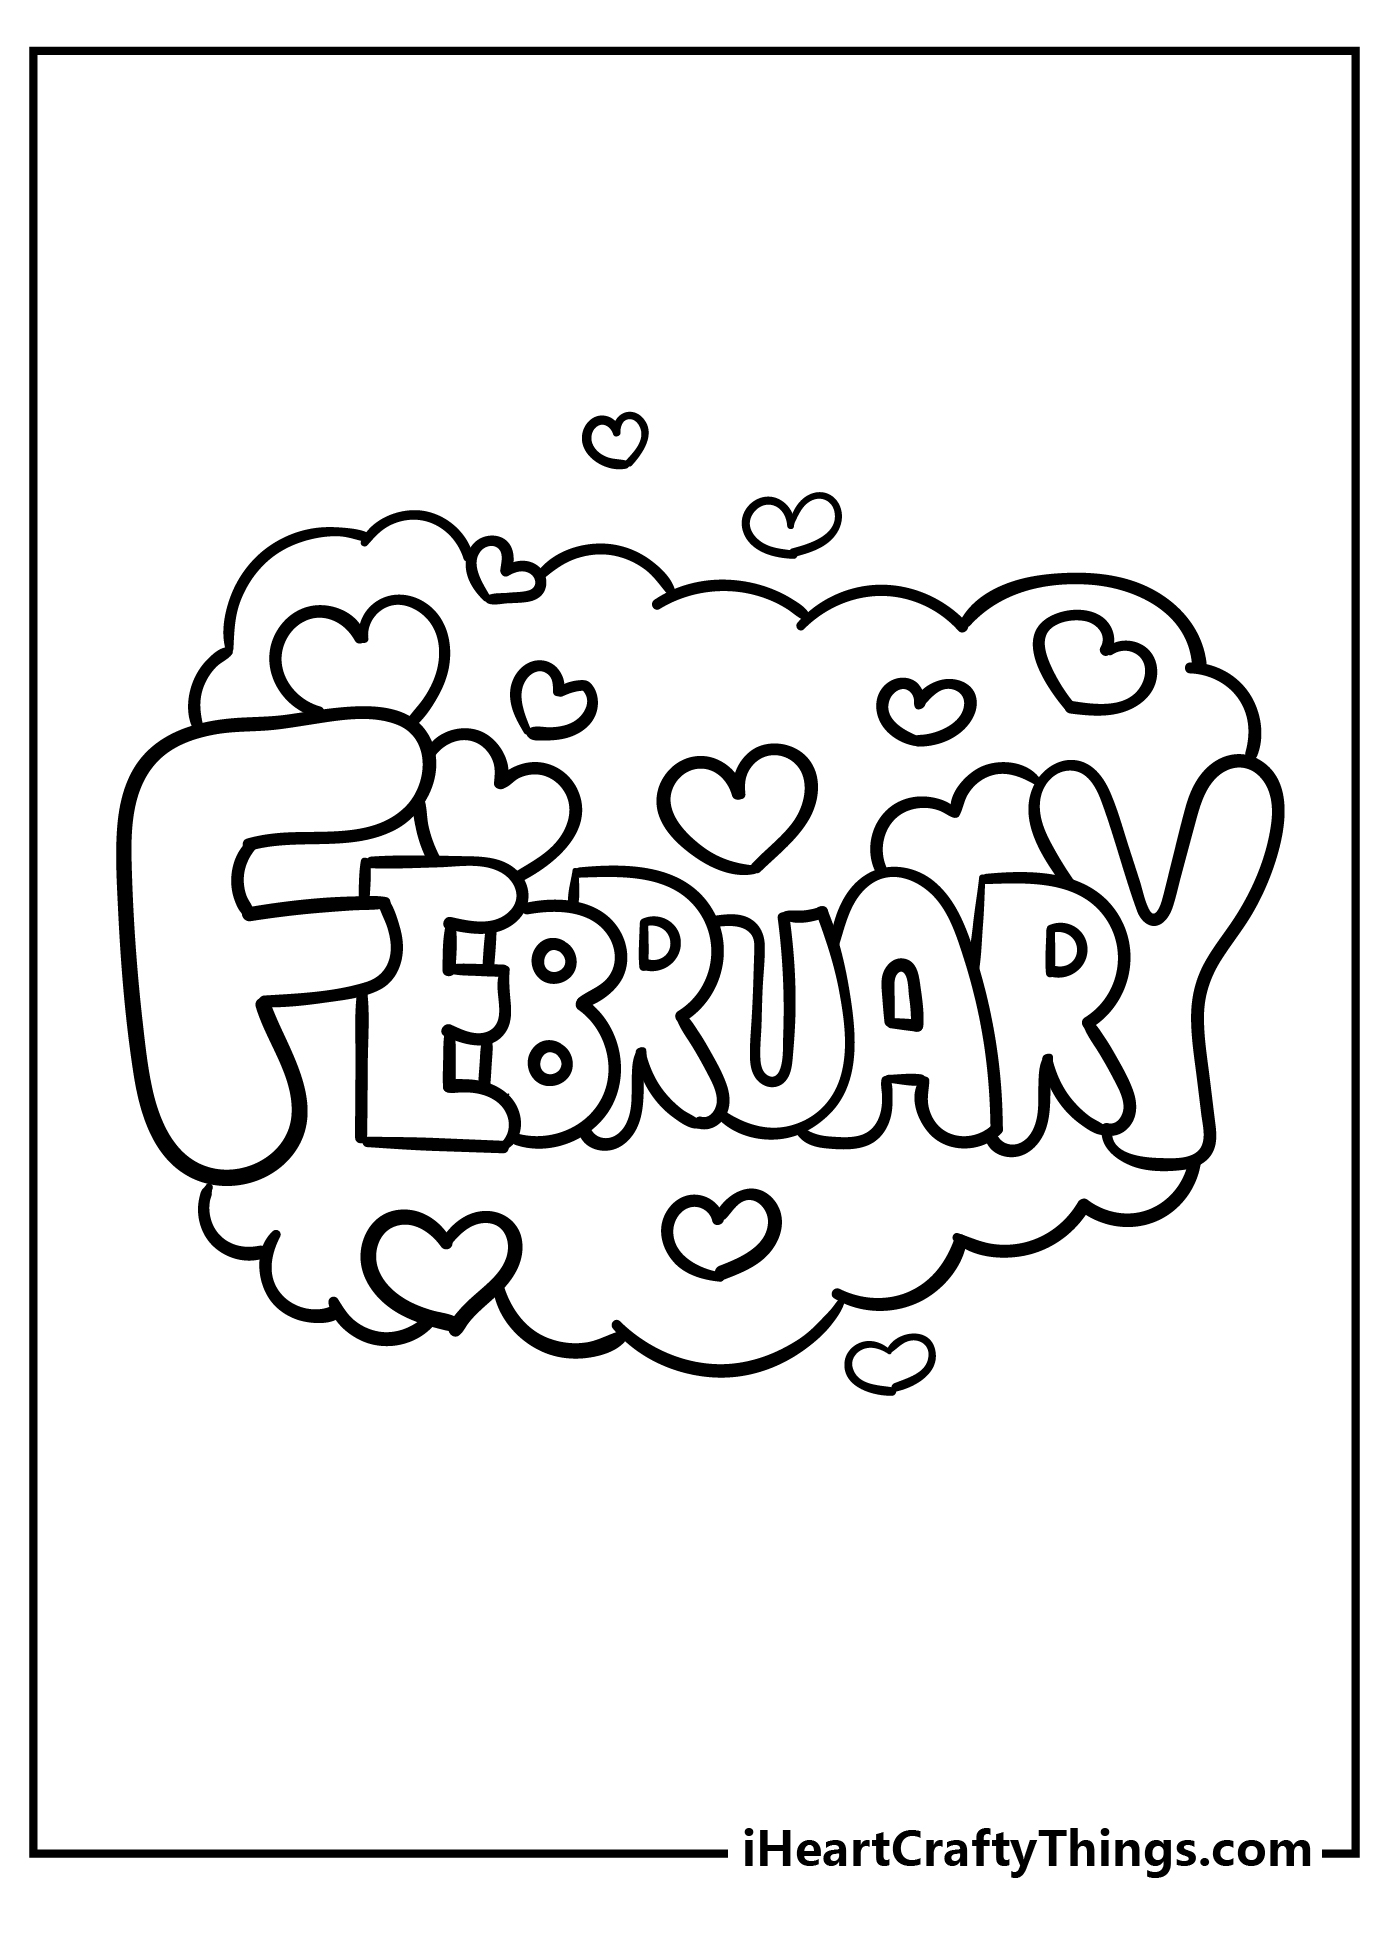 February Coloring Book for adults free download